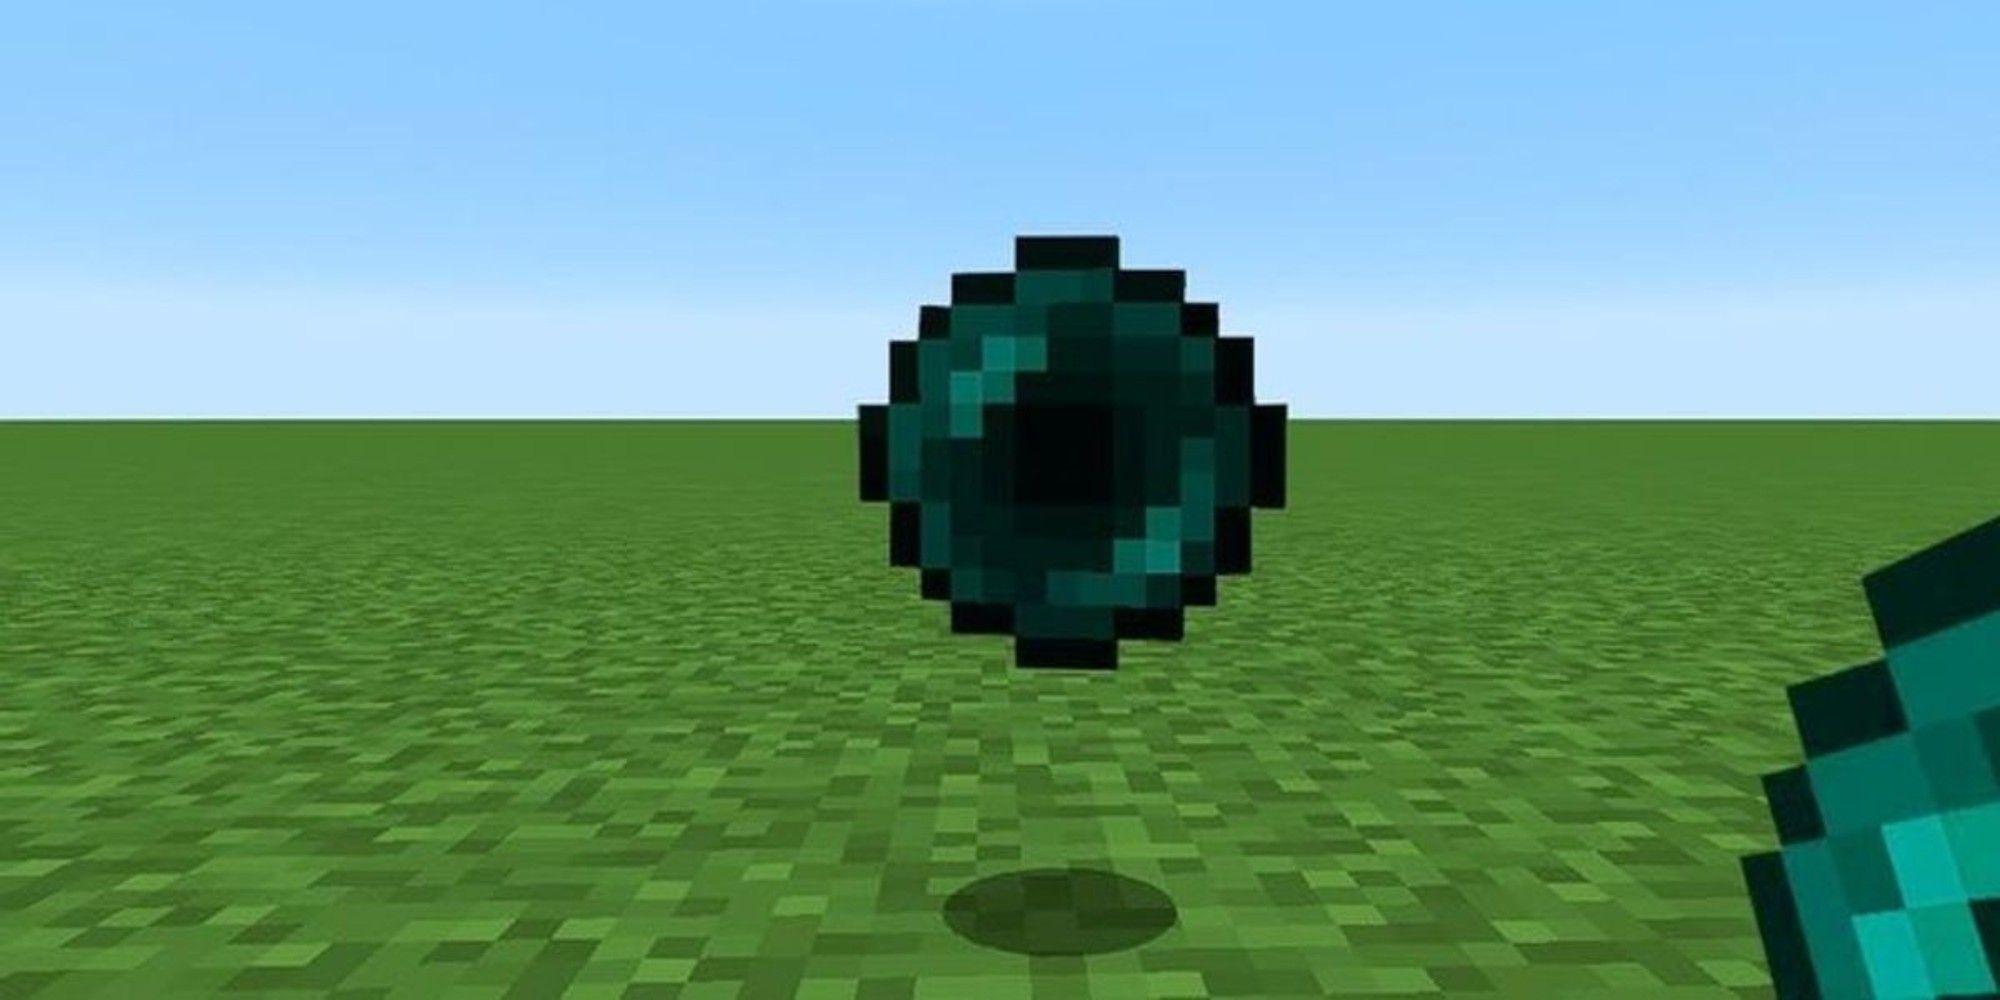 How to Make an Ender Pearl Stasis Chamber in Minecraft